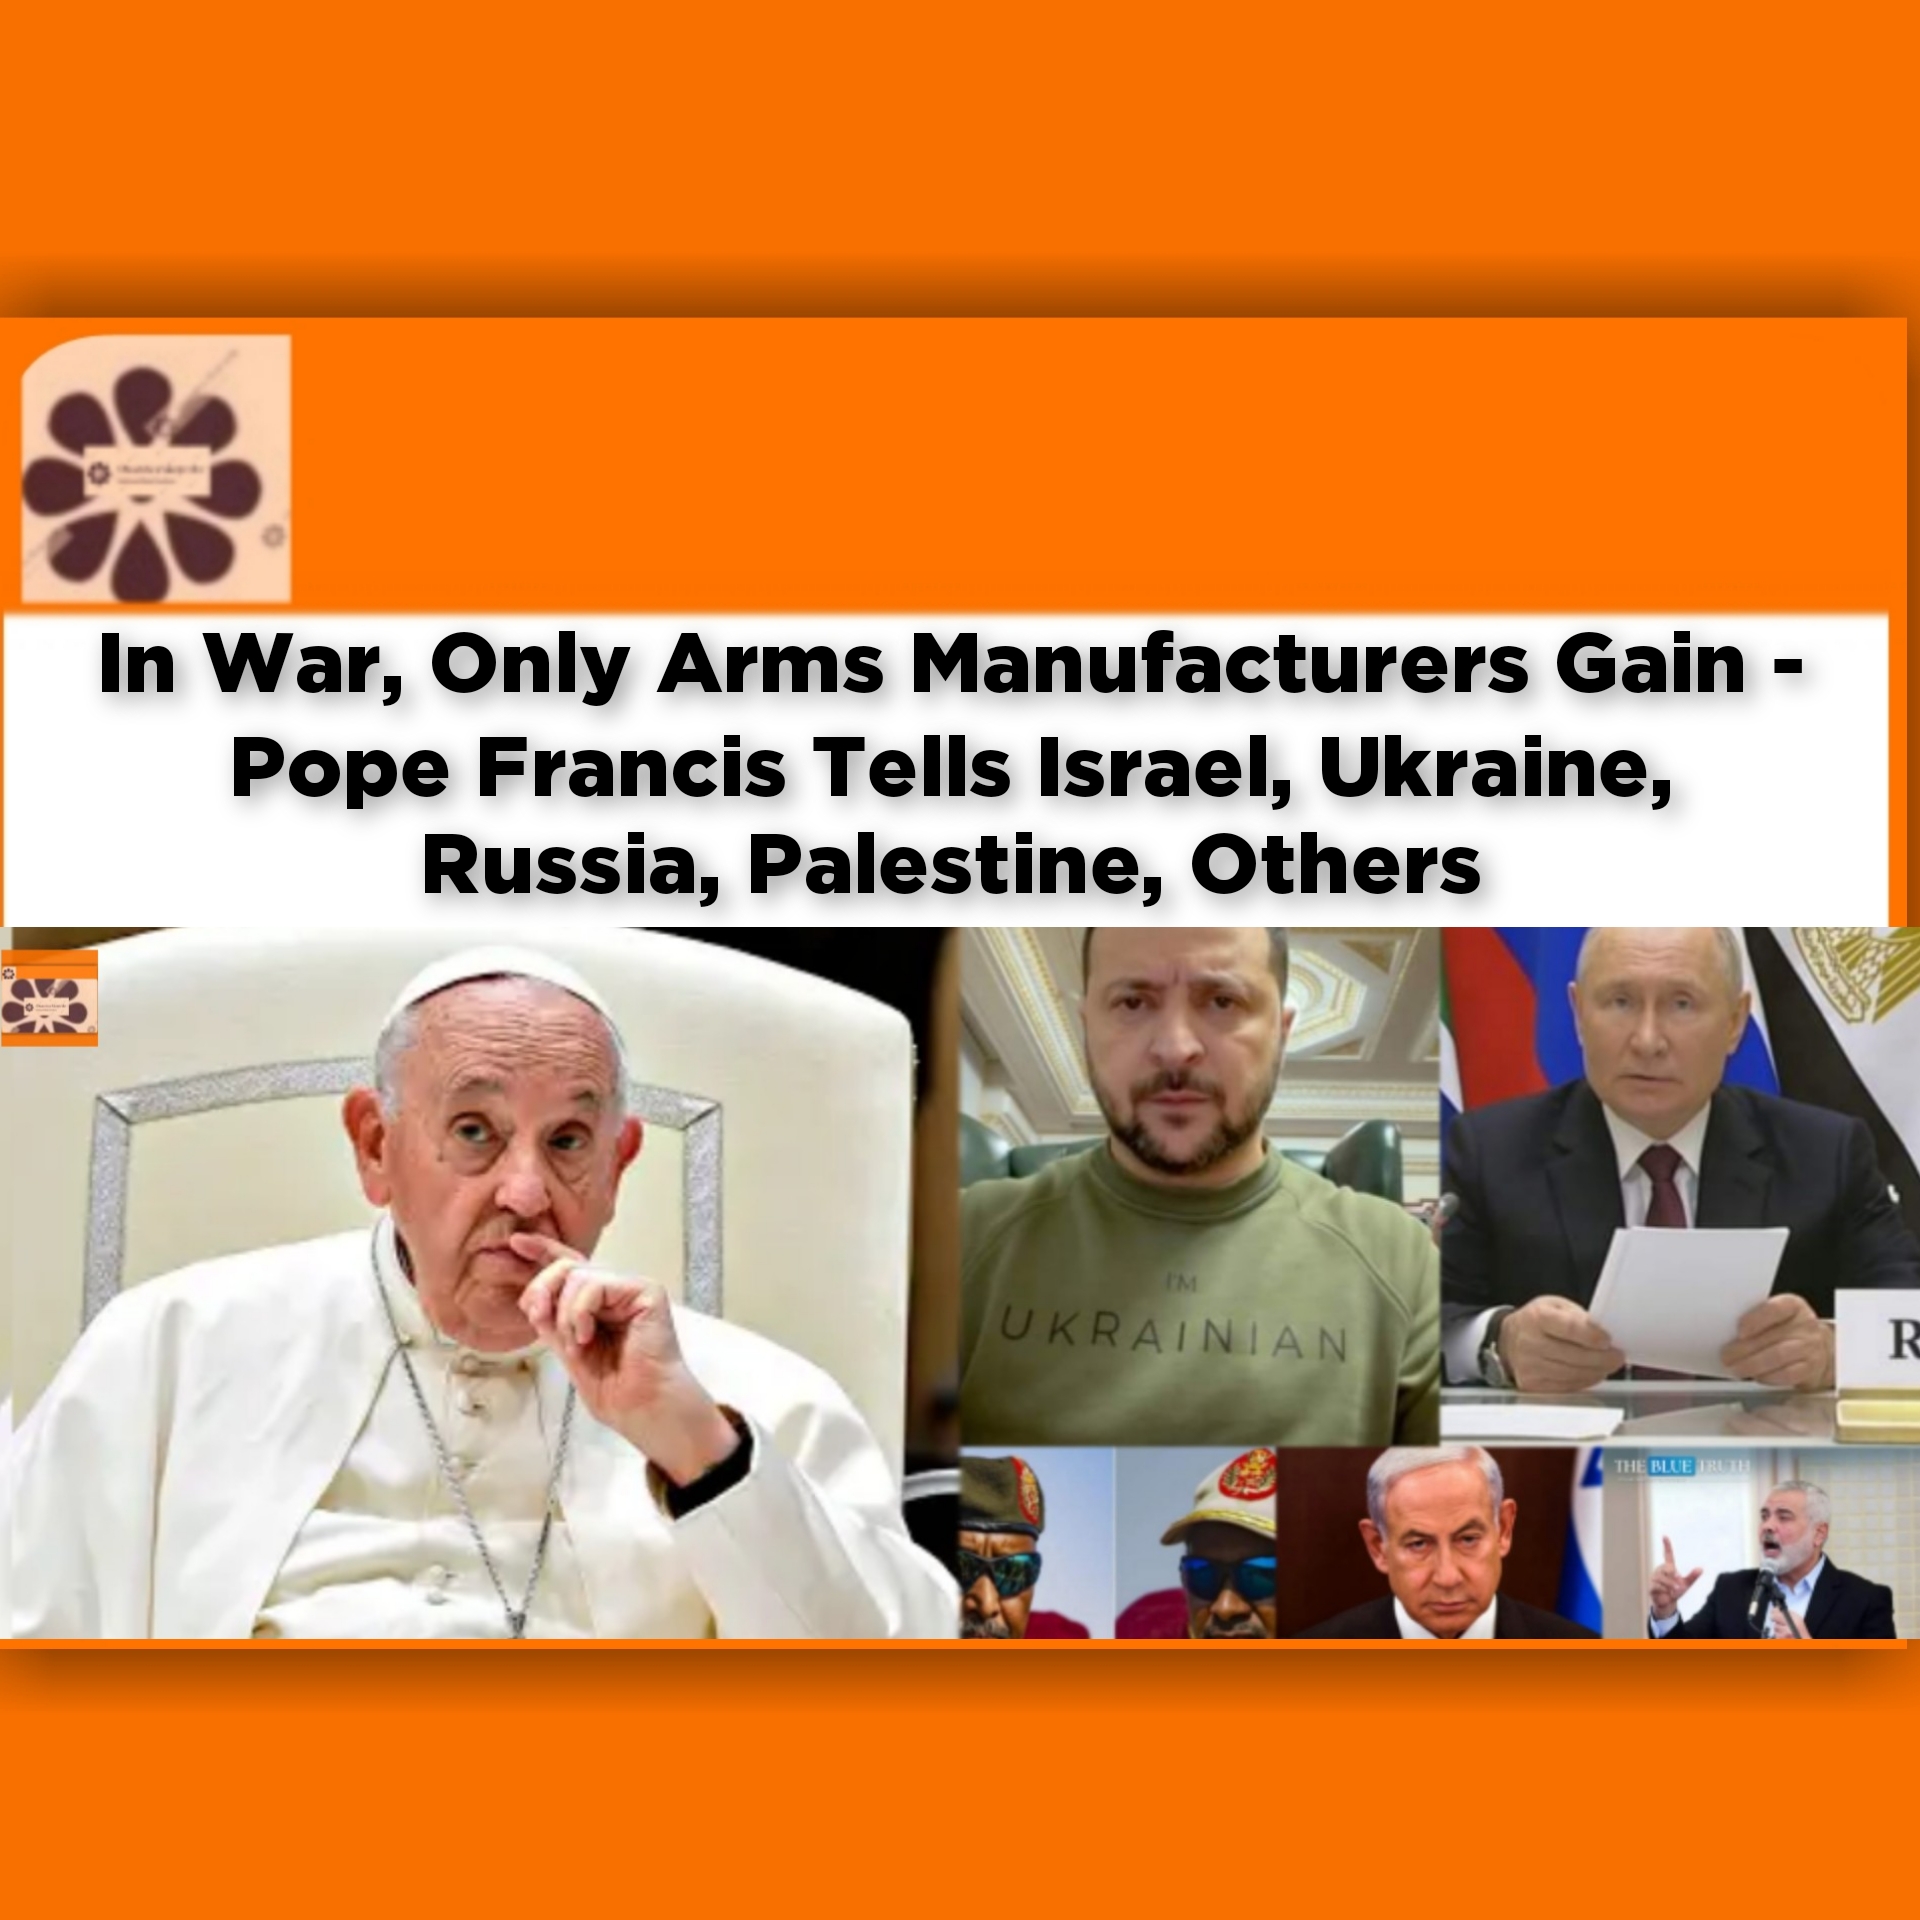 In War, Only Arms Manufacturers Gain - Pope Francis Tells Israel, Ukraine, Russia, Palestine, Others ~ OsazuwaAkonedo #Borno